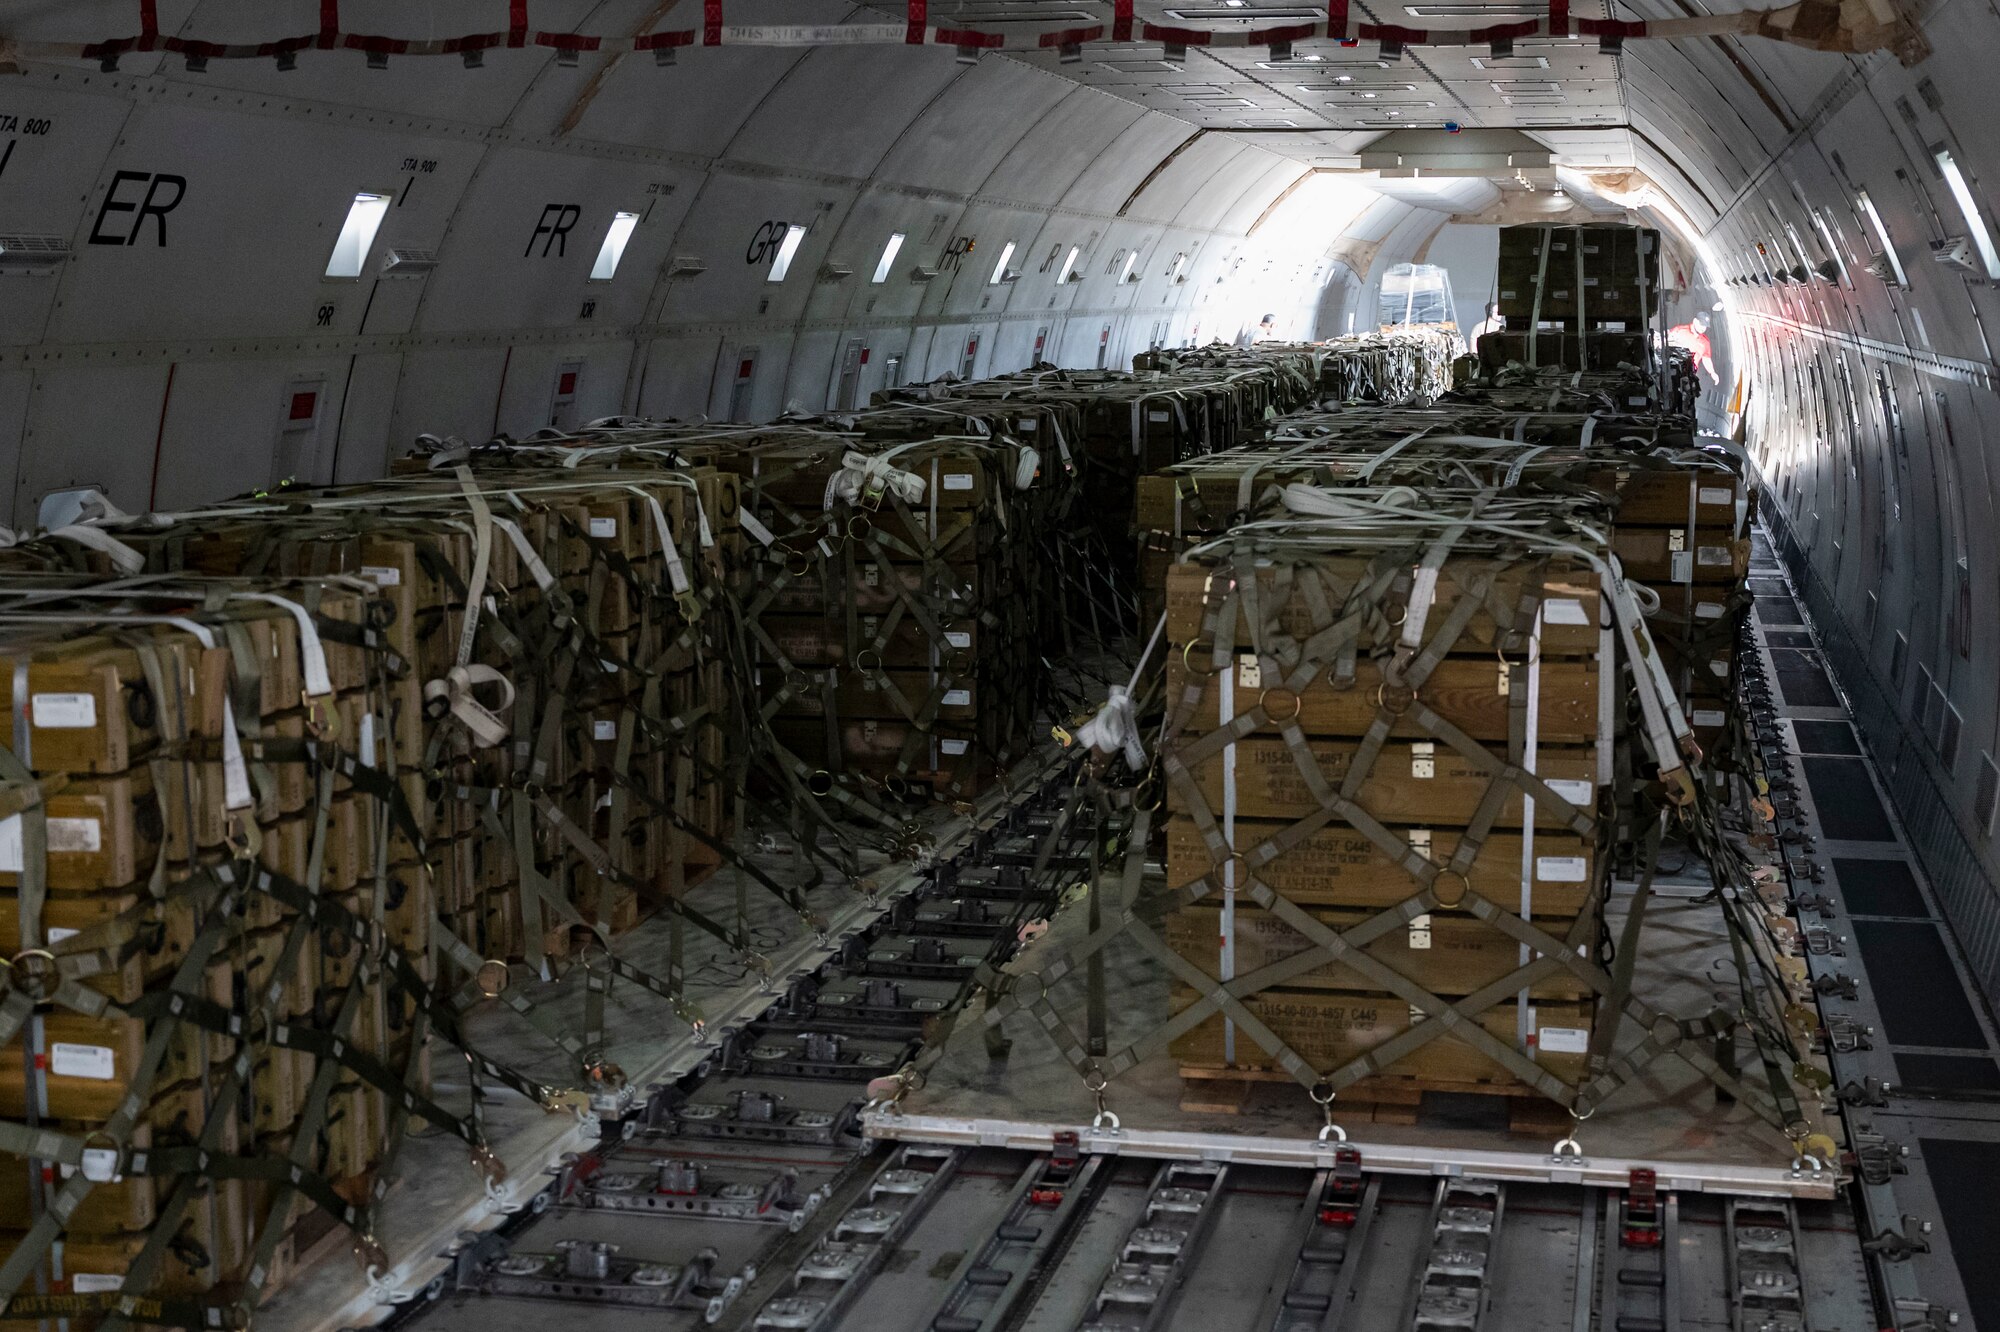 Pallets of ammunition bound for Ukraine are secured onto a commercial plane during a security assistance mission at Dover Air Force Base, Delaware, July 21, 2022. The Department of Defense is providing Ukraine with critical capabilities to defend against Russian aggression under the Ukraine Security Assistance initiative. (U.S. Air Force photo by Senior Airman Faith Schaefer)